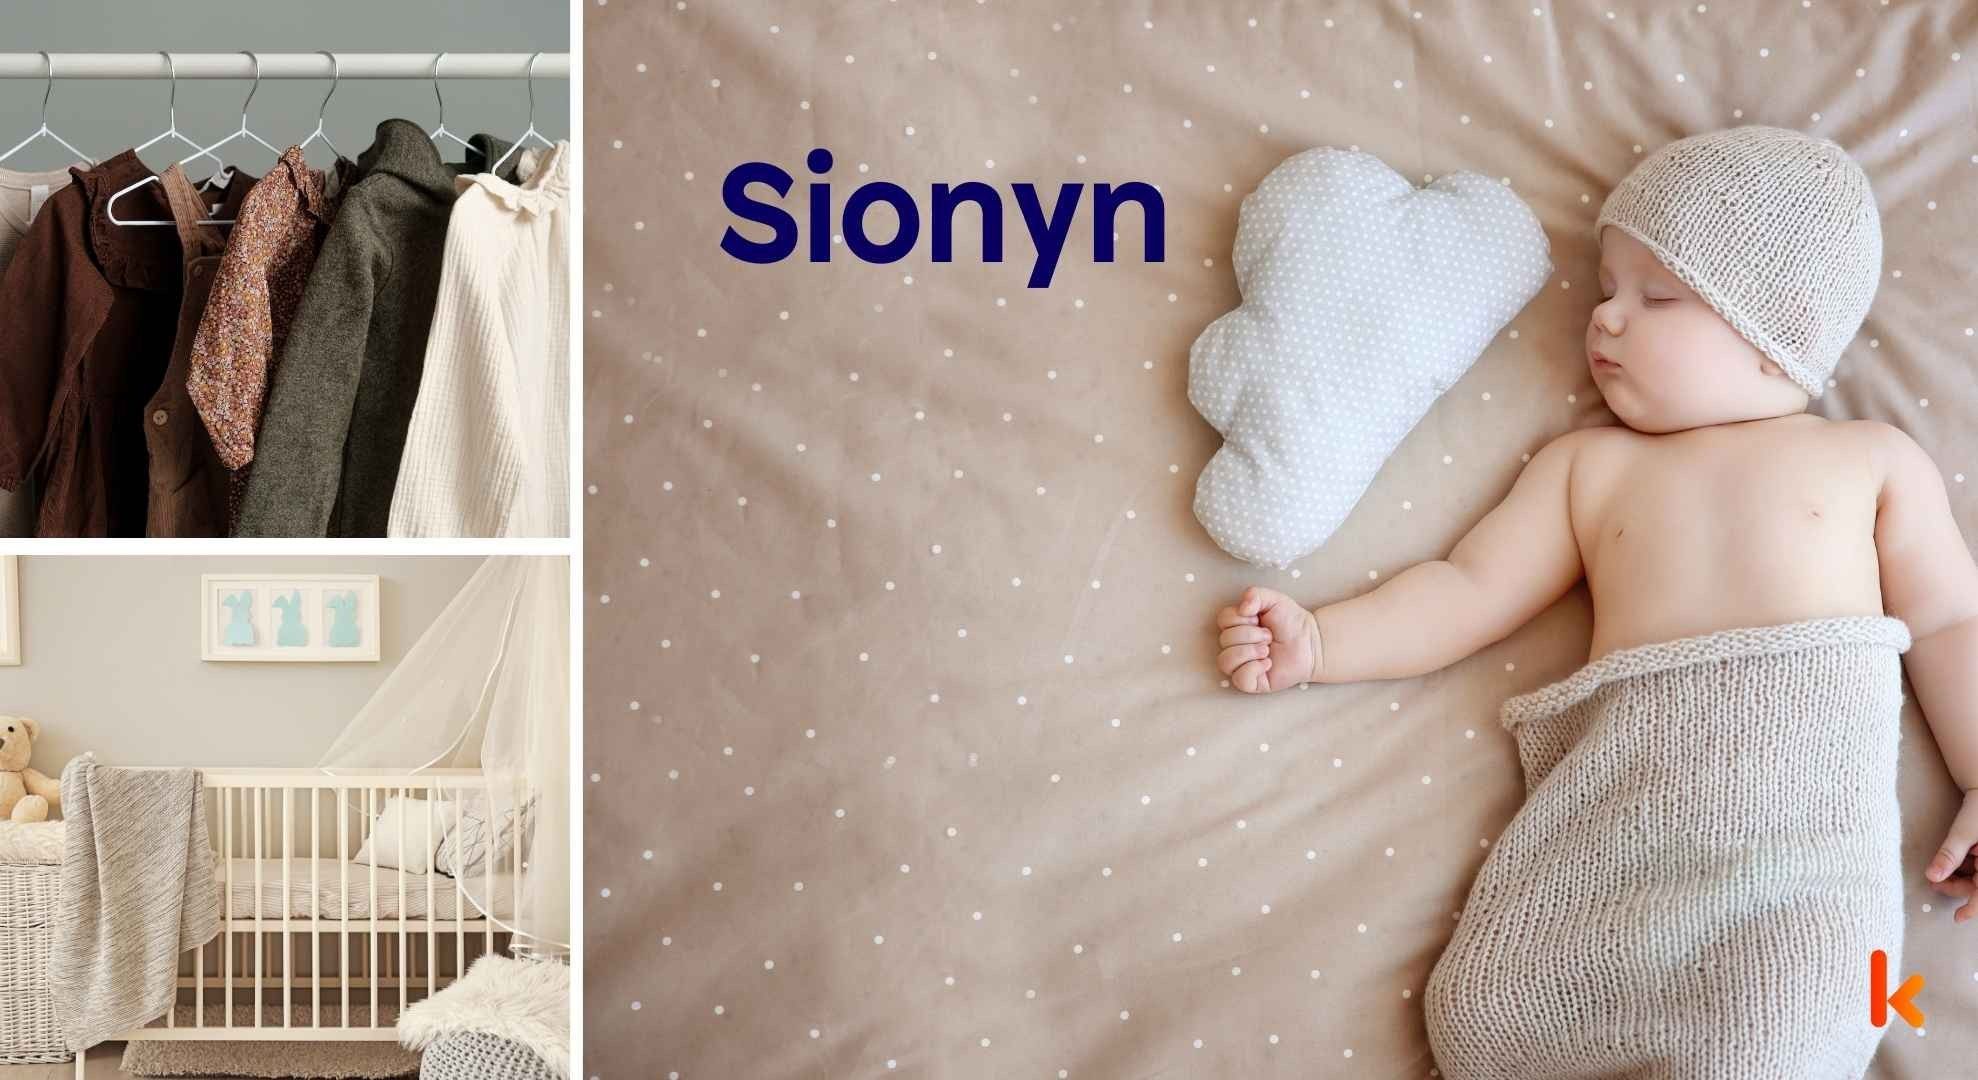 Meaning of the name Sionyn